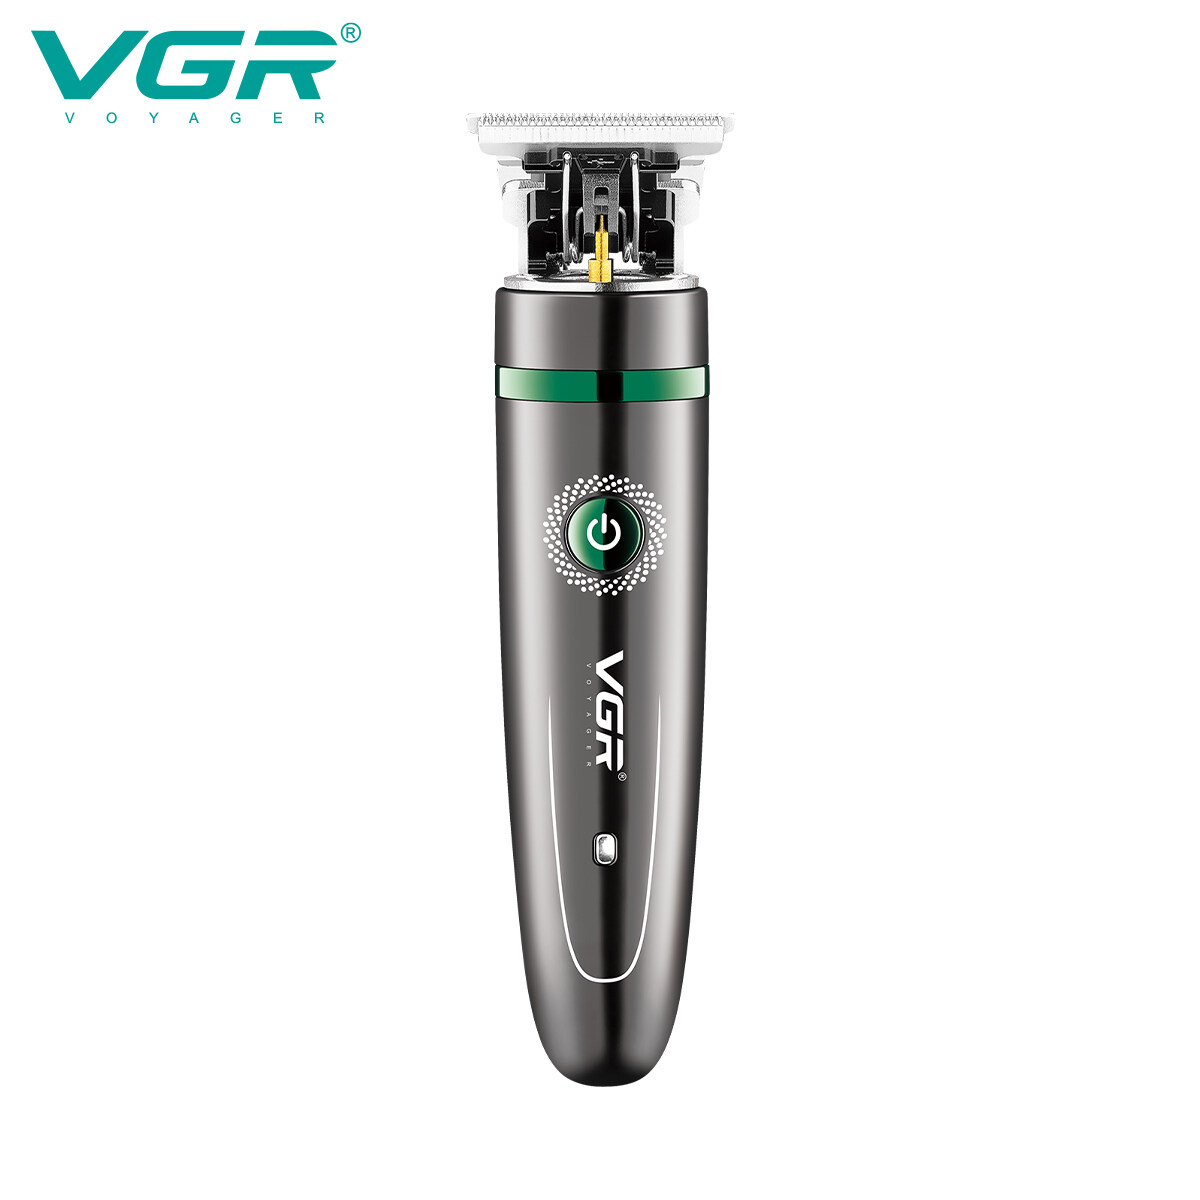 electric nose hair trimmer supplier, electric nose trimmer factories, manual nose hair trimmer factory, nose clipper trimmer factories, electric nose hair trimmer factory